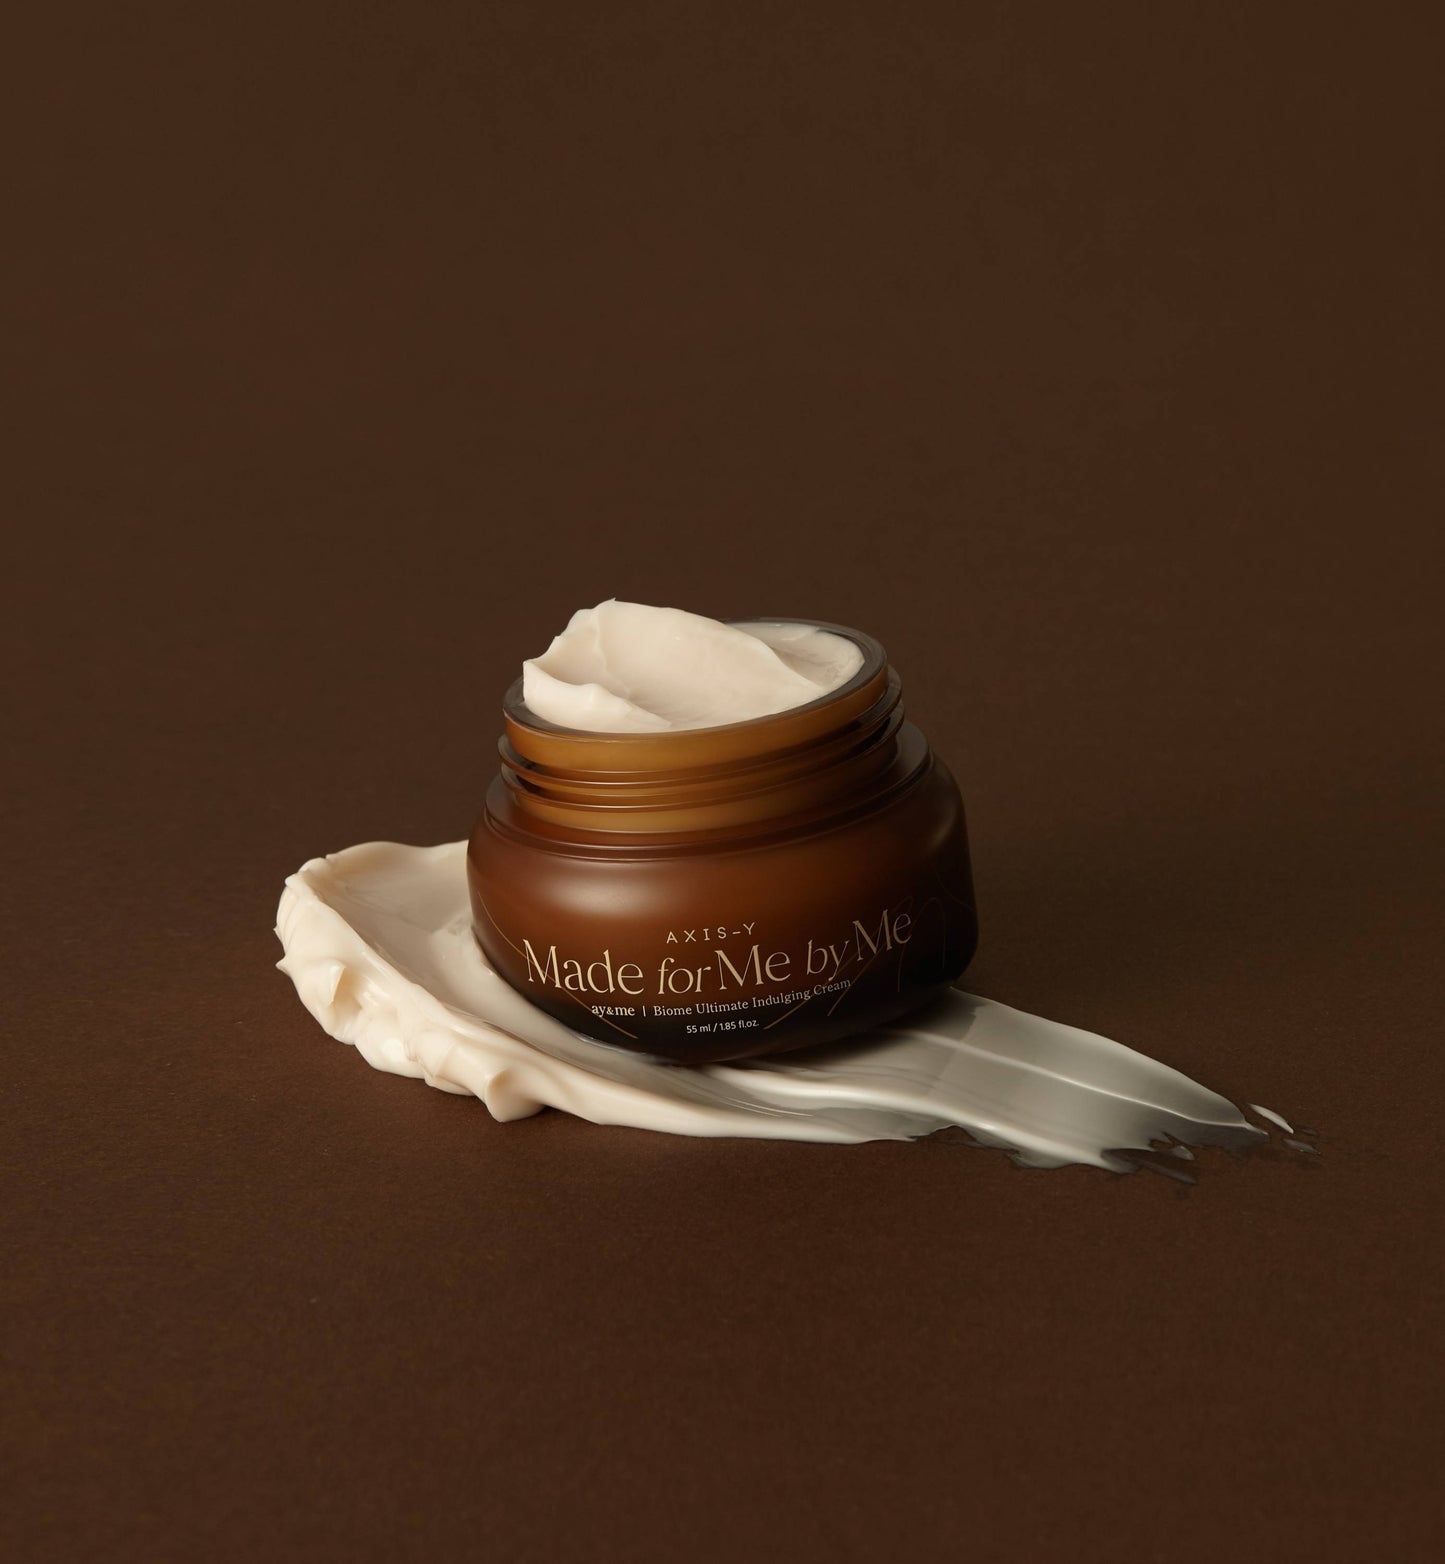 AXIS-Y ay&me Biome Ultimate Indulging Cream from Axis-Y